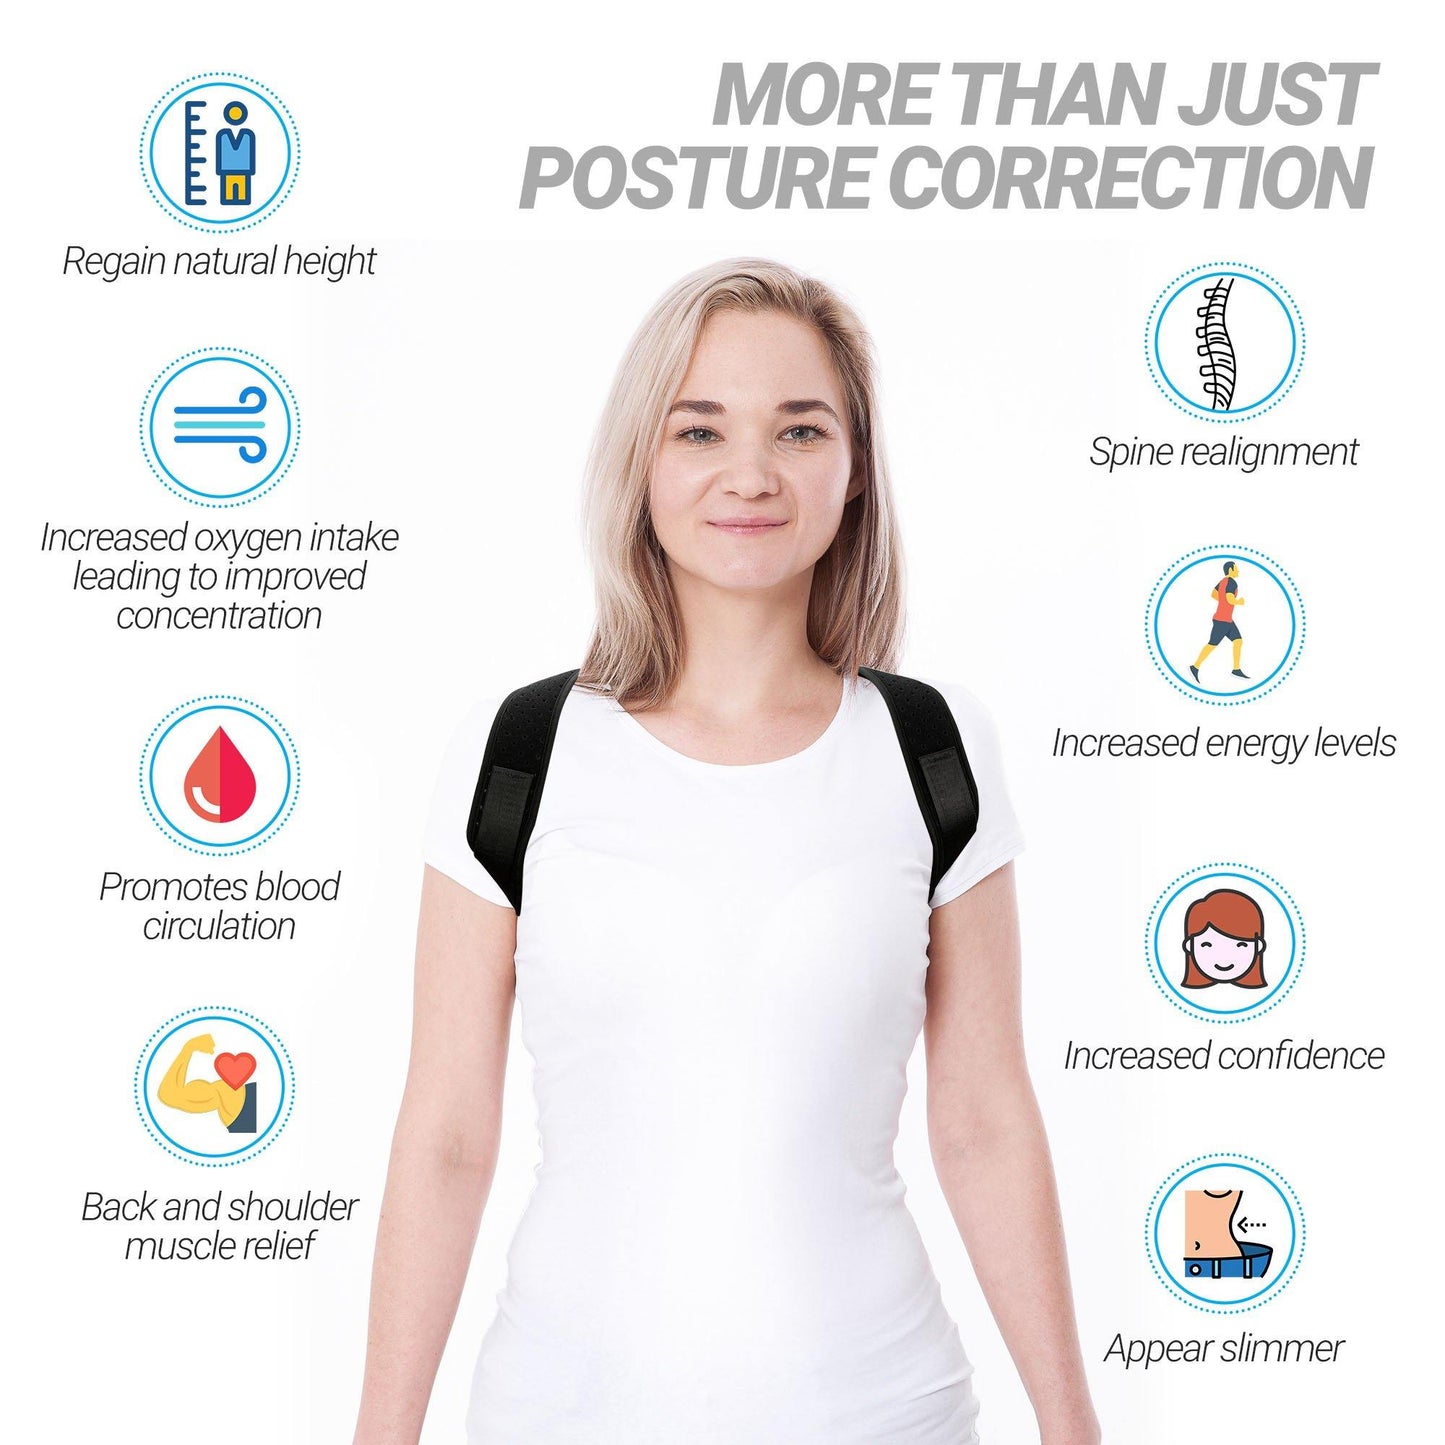 VOKKA Posture Corrector for Men and Women, Spine and Back Support, Providing Pain Relief for Neck, Back, Shoulders, Adjustable and Breathable Back Brace Improves Posture and Provides Back Support